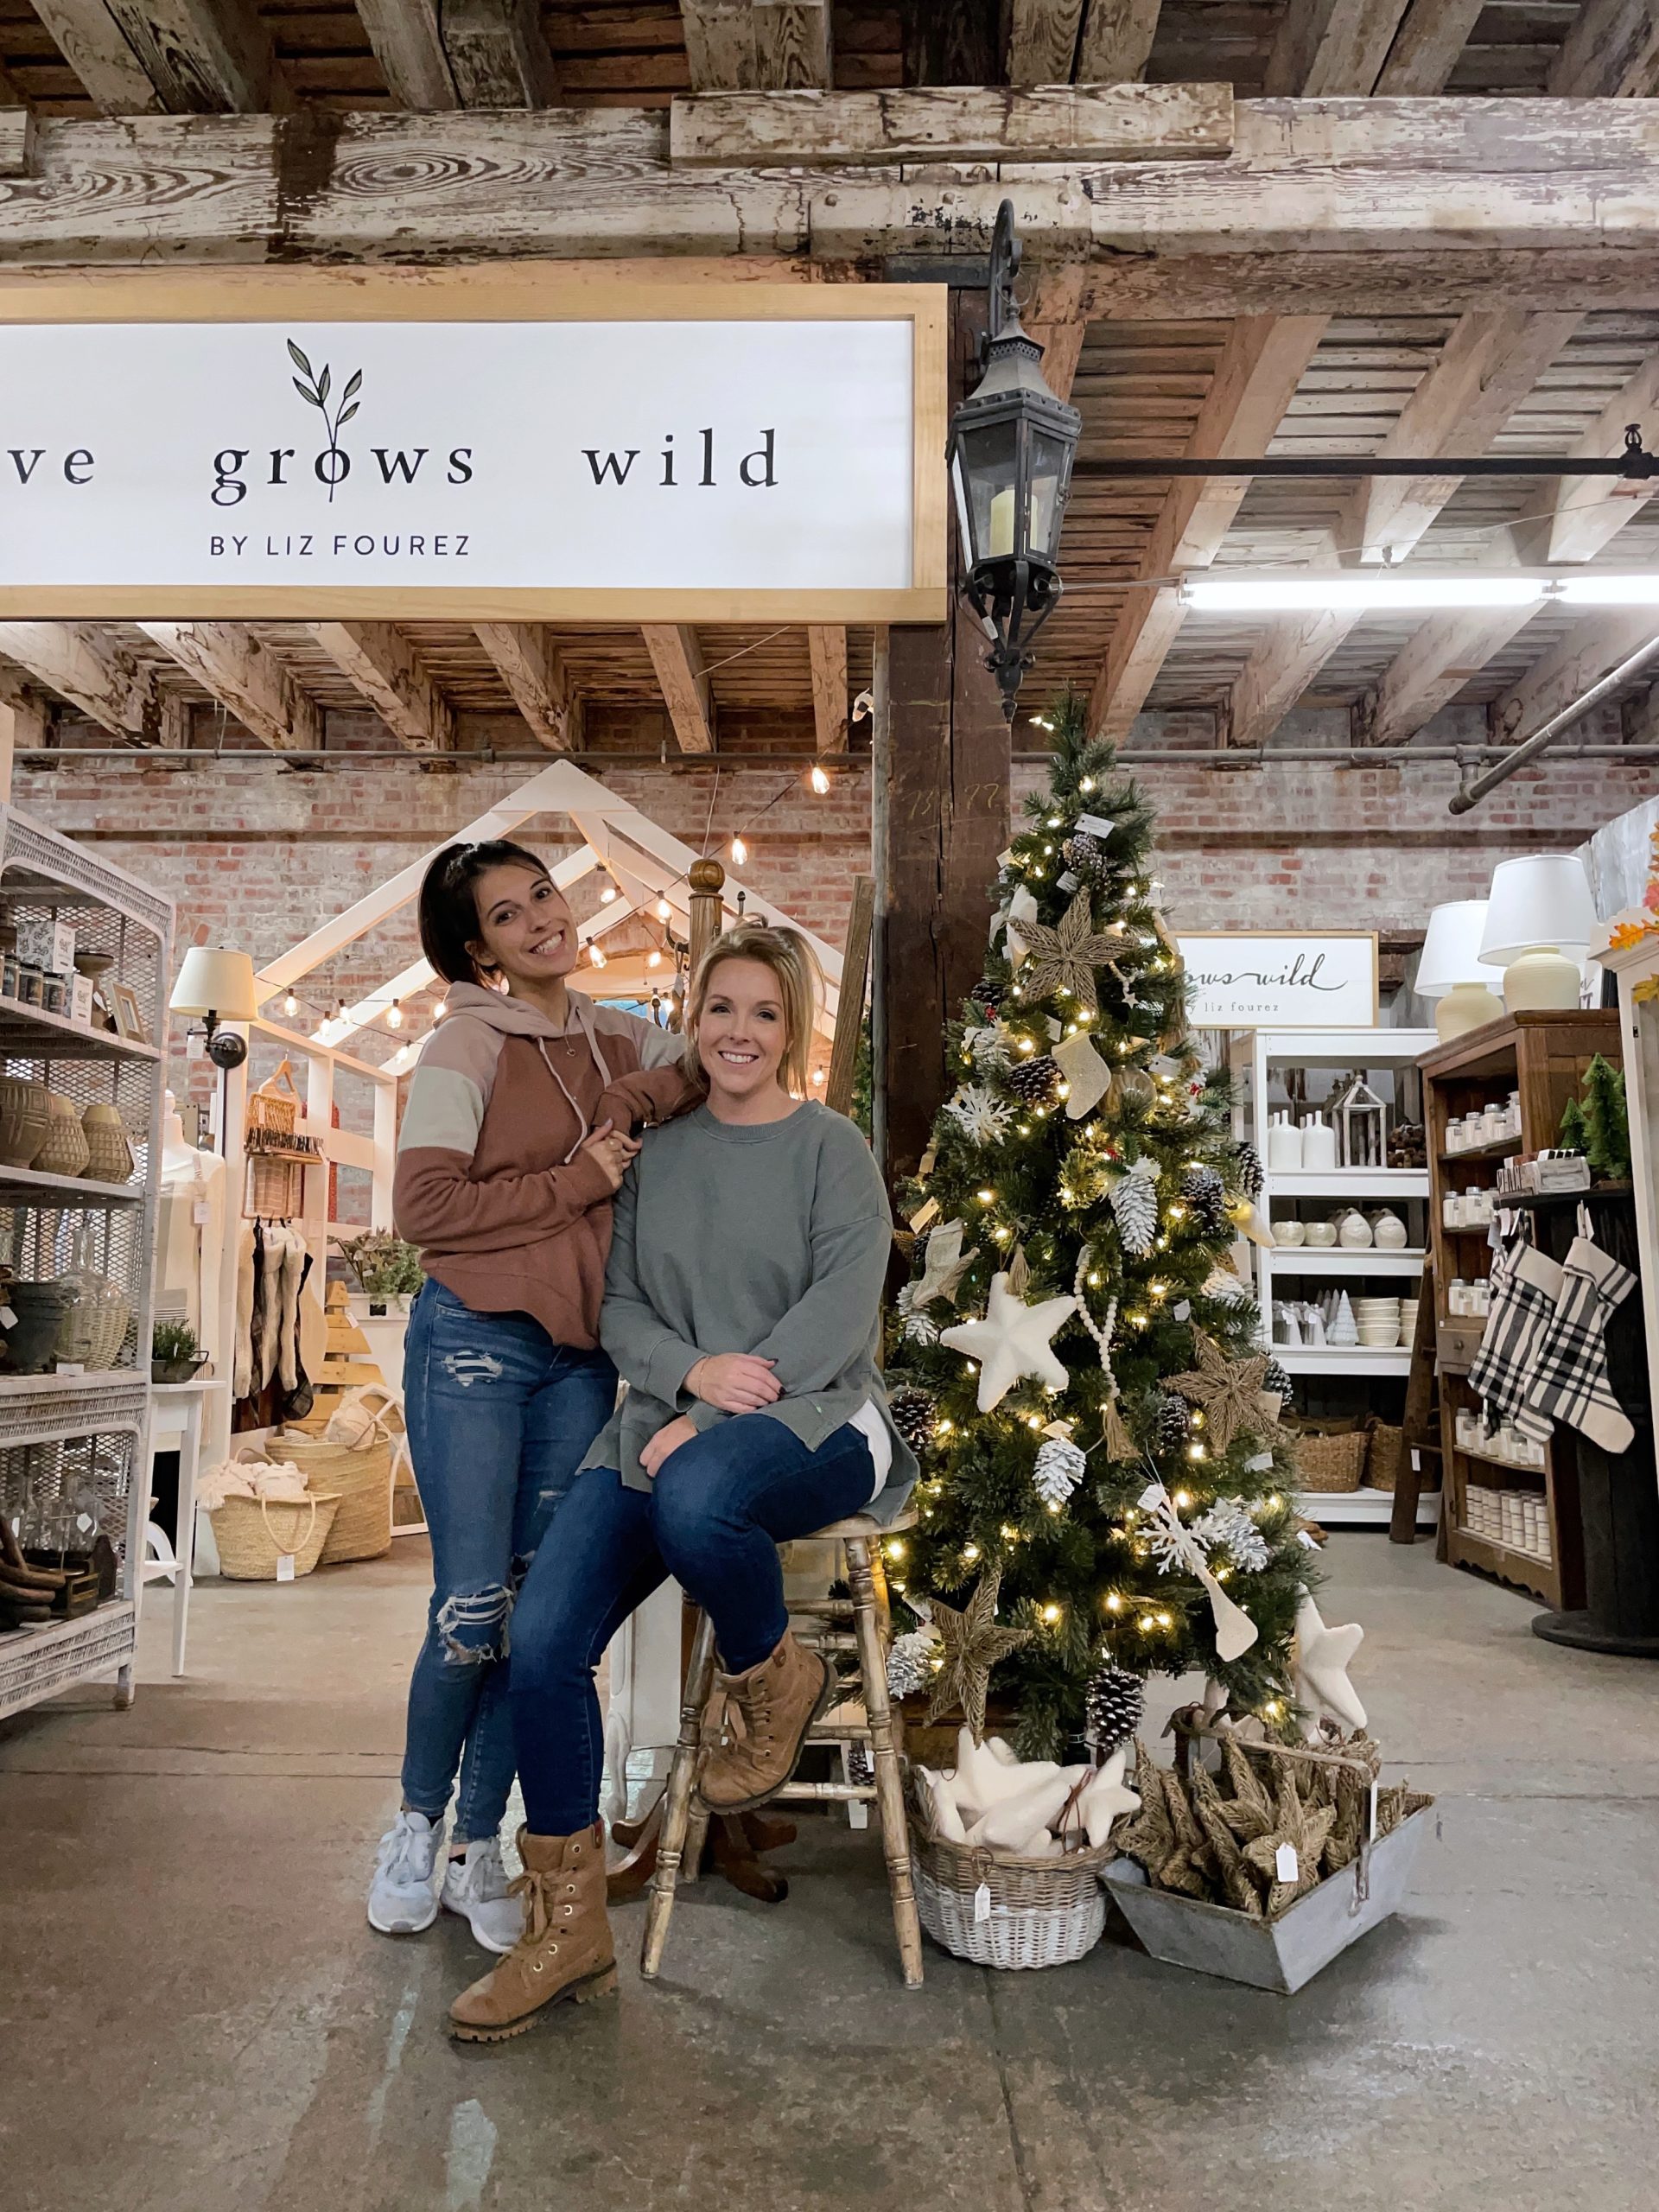 Take a look behind the scenes of our biggest restock to date at Love Grows Wild Market, a home decor retail store owned and curated by Indiana influencer and interior decorator, Liz Fourez of lovegrowswild.com